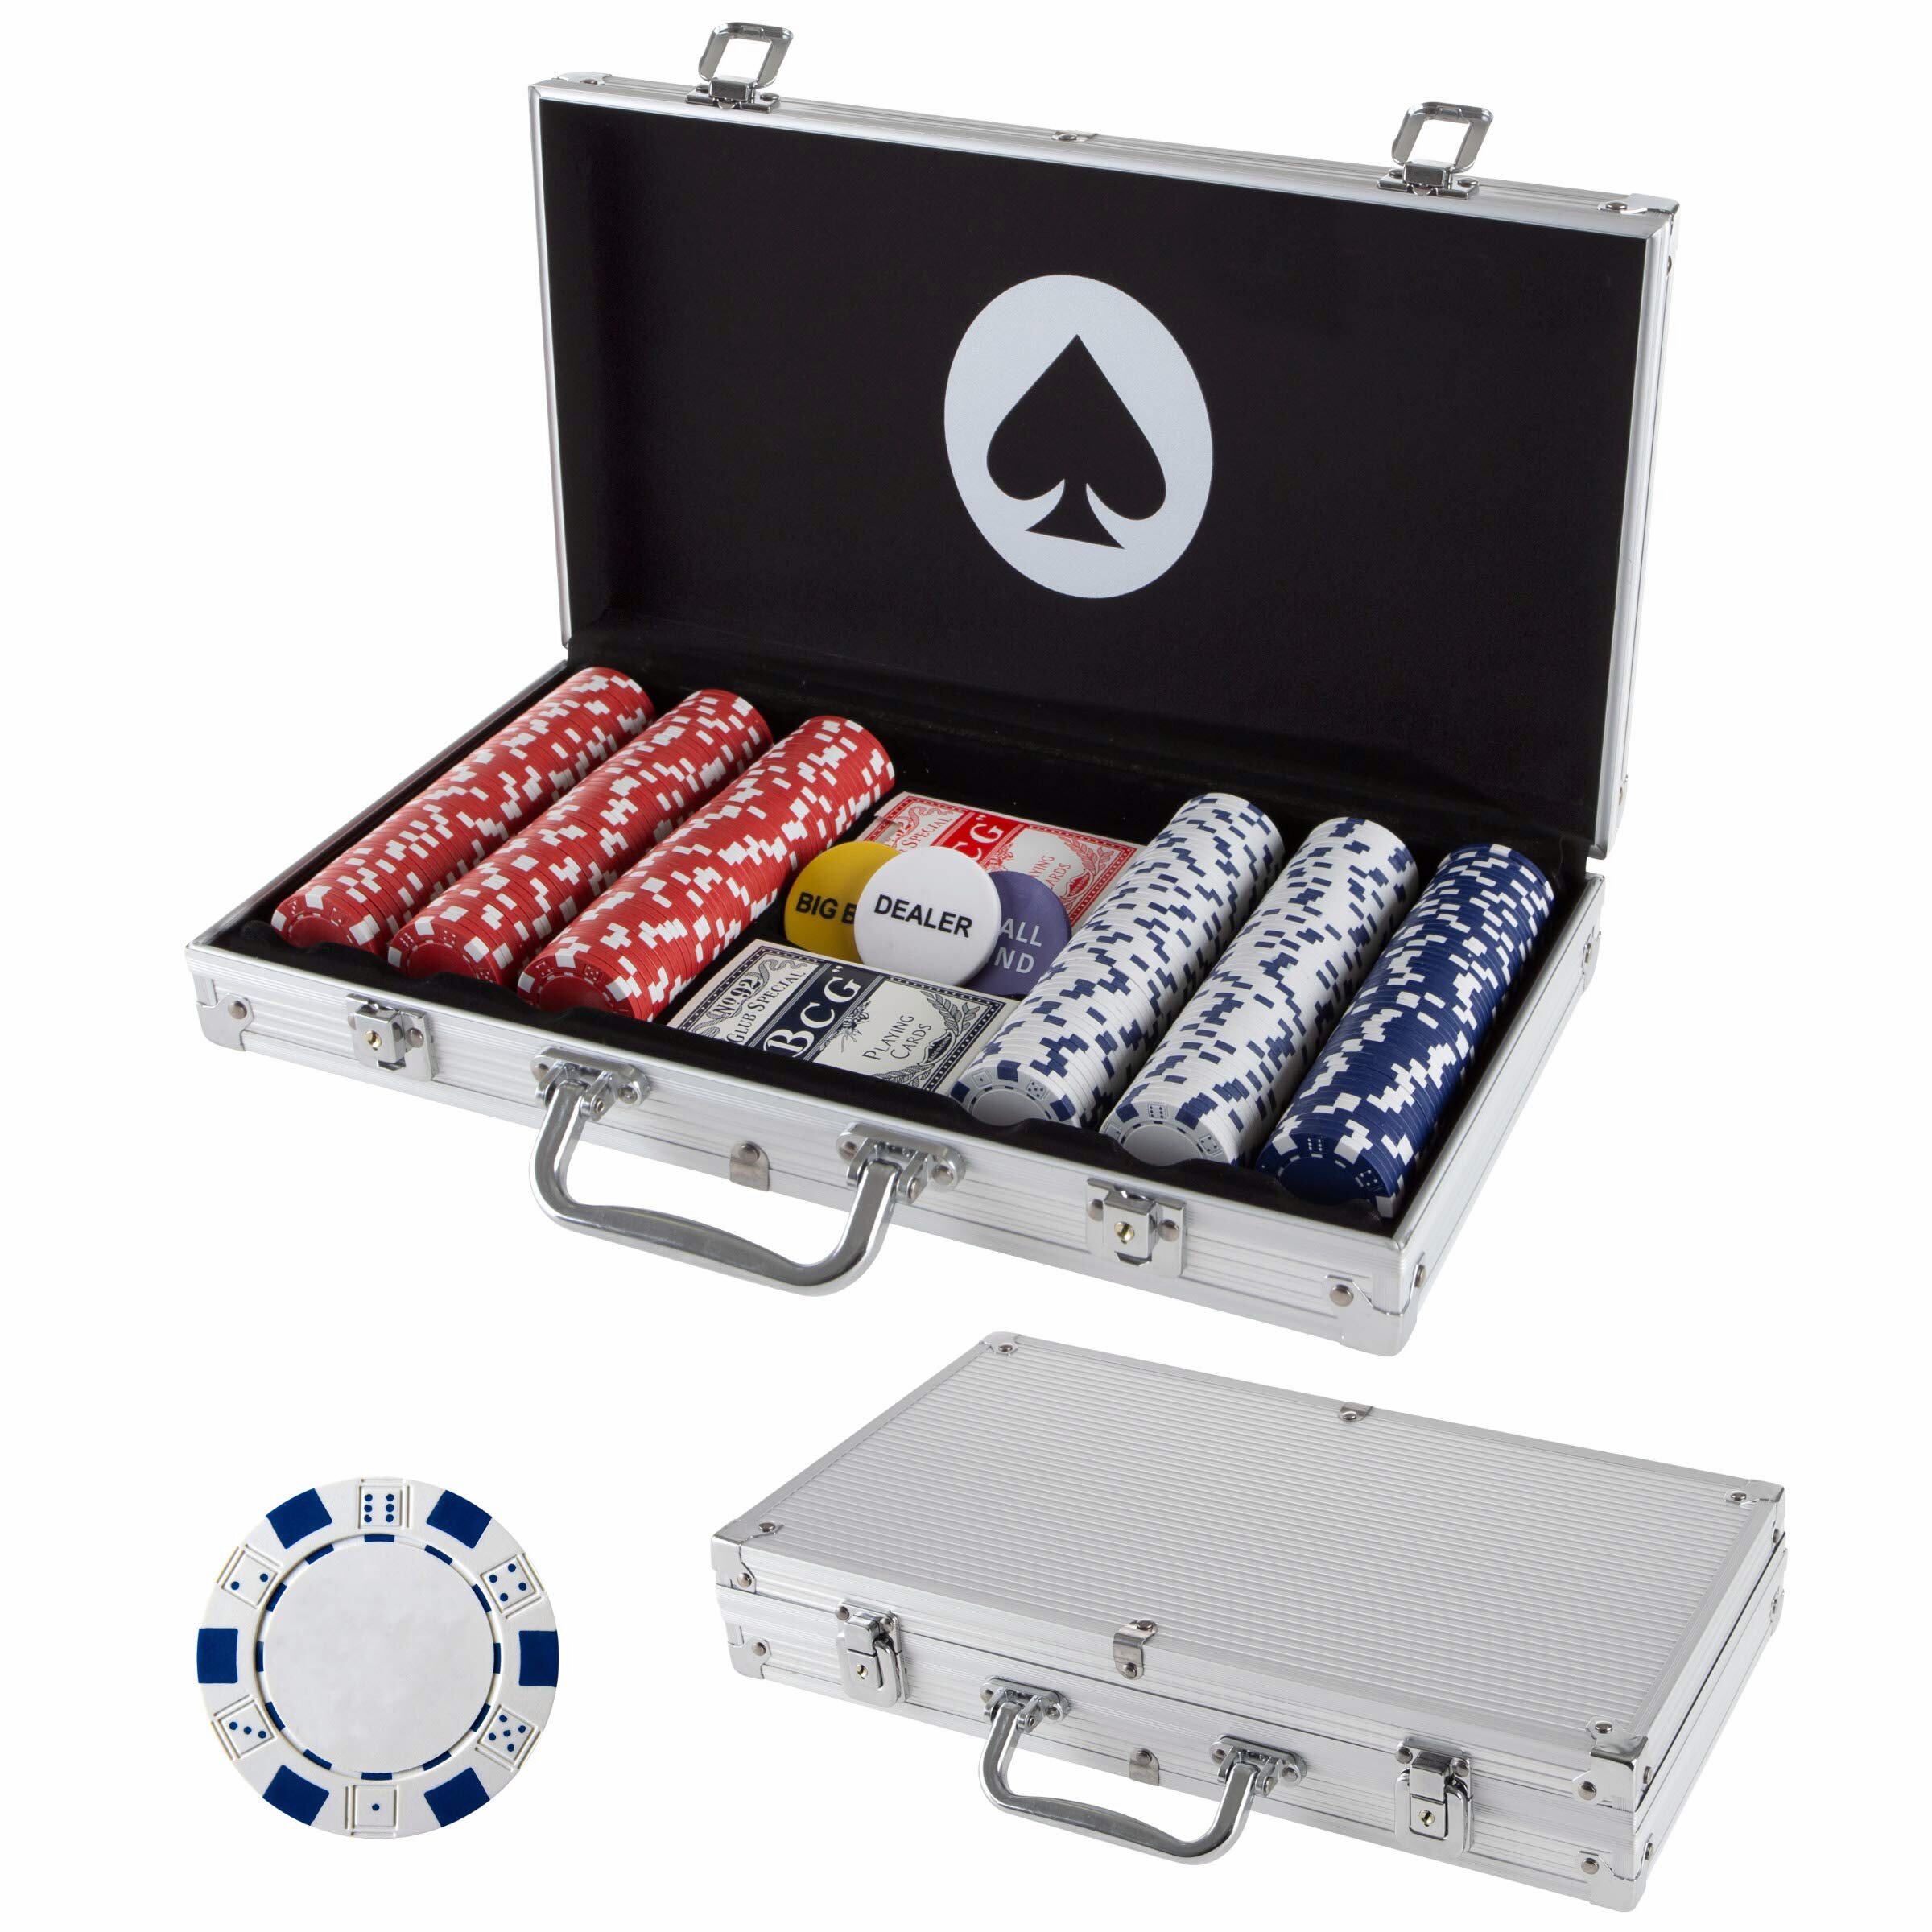 Casino Texas Clay Poker Chip Set Blackjack Table Cloth Cards Dealer chips 